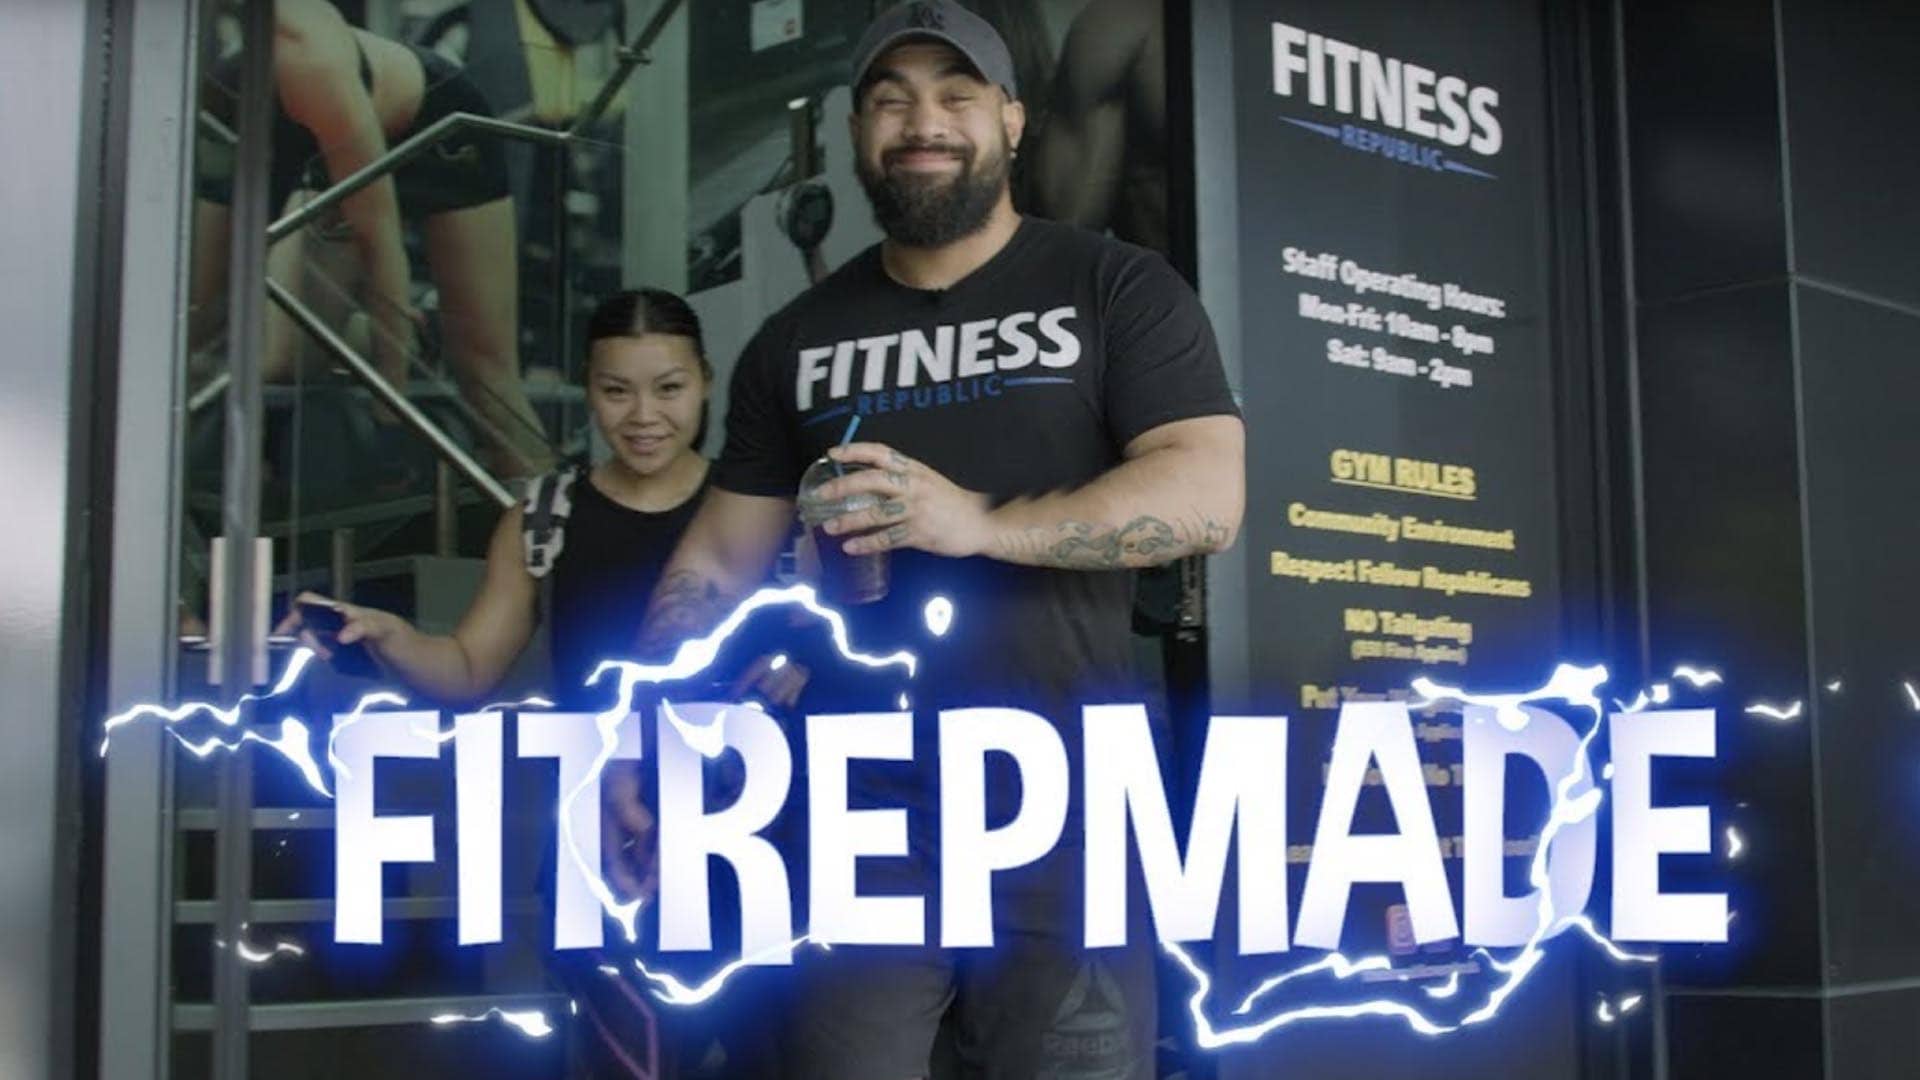 Locations Locations - FITREPMADE 9 fitness republic video series online